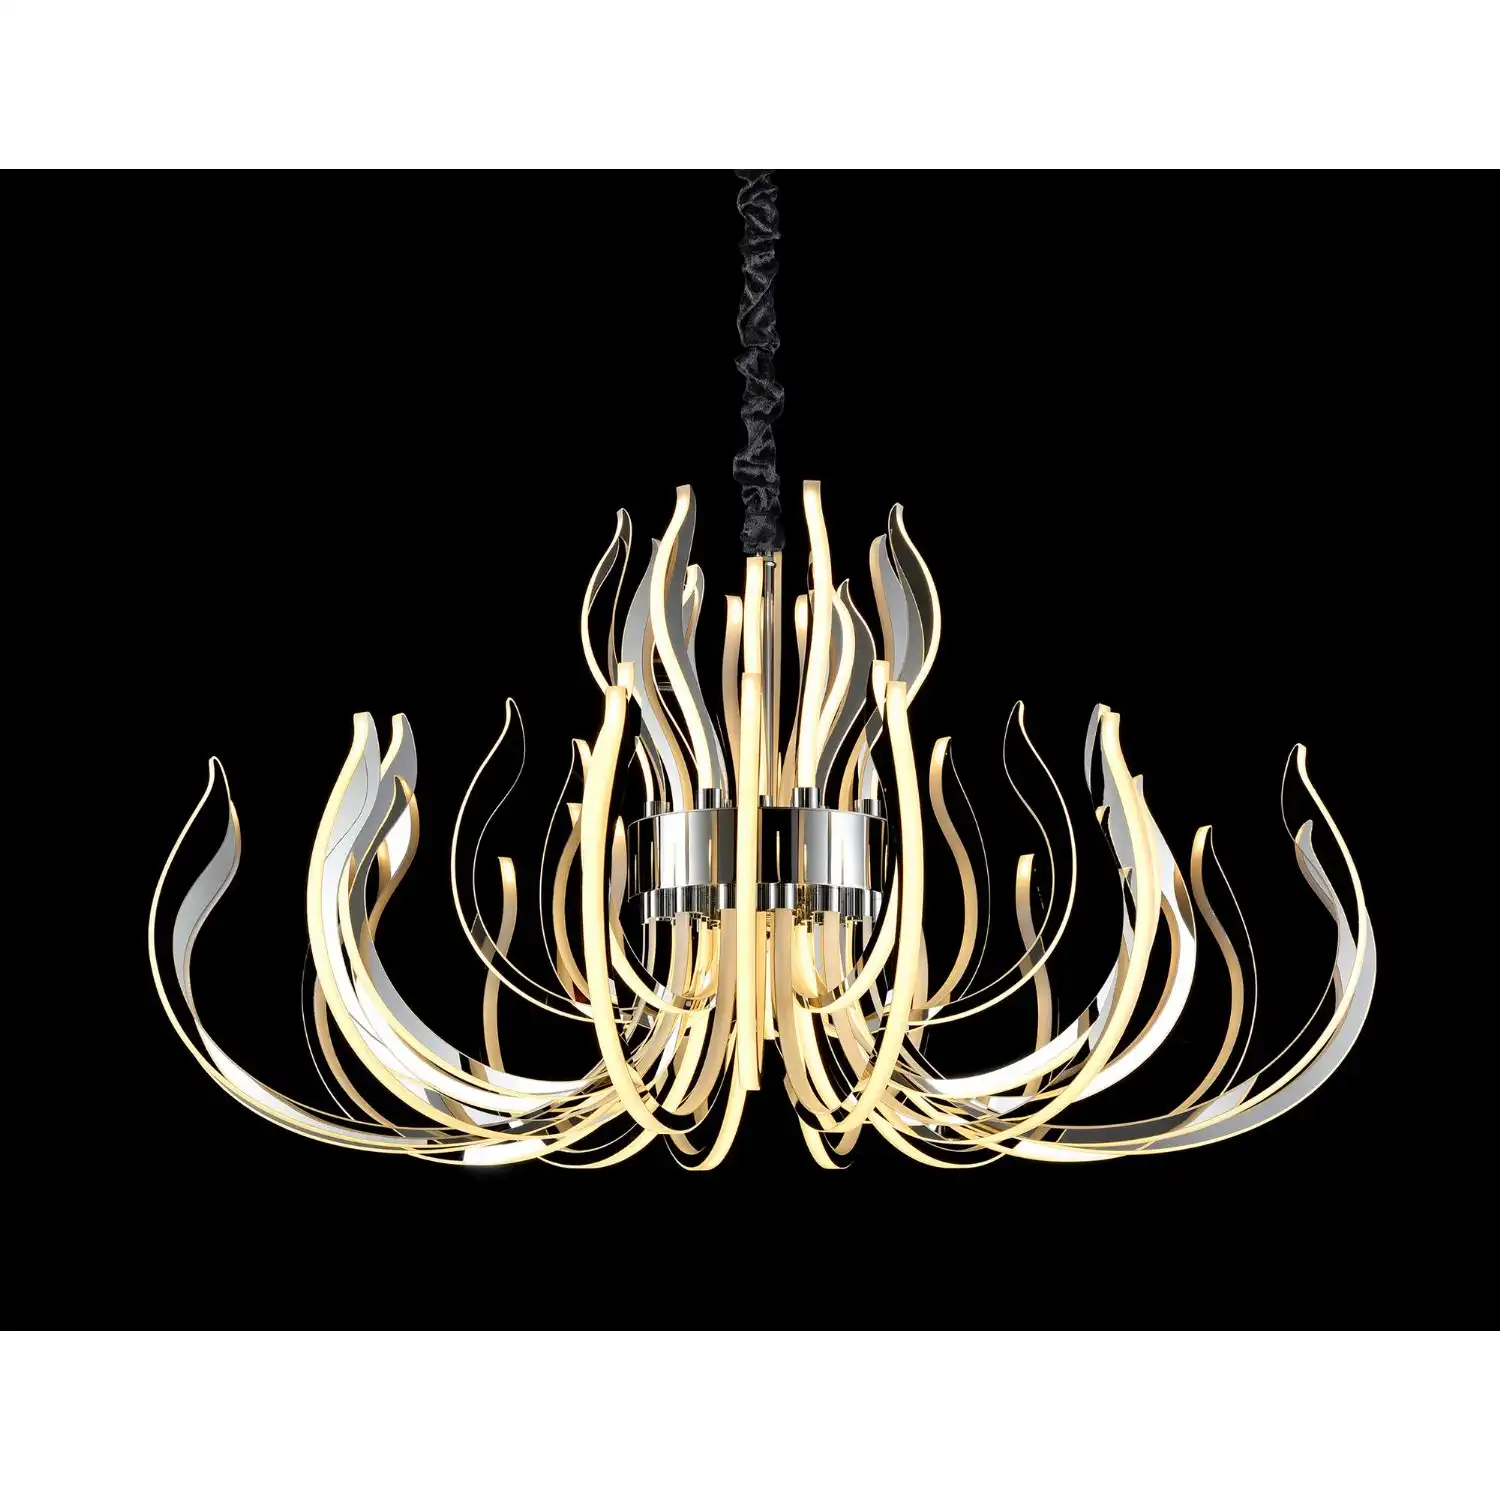 Versailles Pendant, 553W LED, 3000K, 26715lm, IP20, Polished Chrome, 3yrs Warranty, (ITEM REQUIRES CONSTRUCTION CONNECTION) Item Weight: 29kg